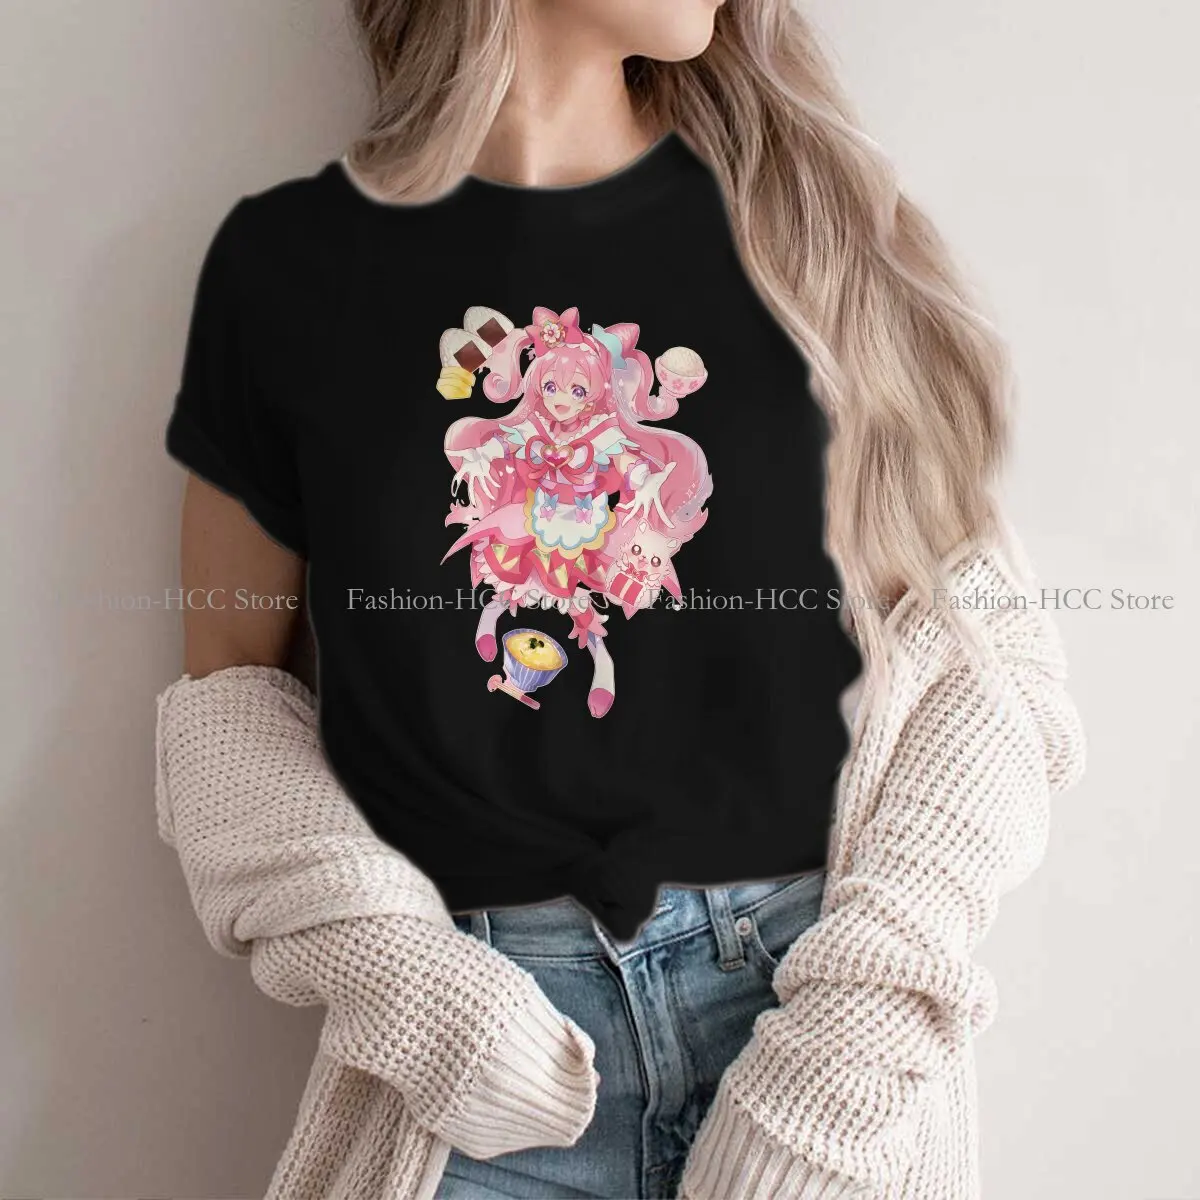 

Delicious Party Precious Kome-Kome Nagomi Yu Graphic Polyester TShirt Pretty Cure Precure Anime Style Tops Casual T Shirt